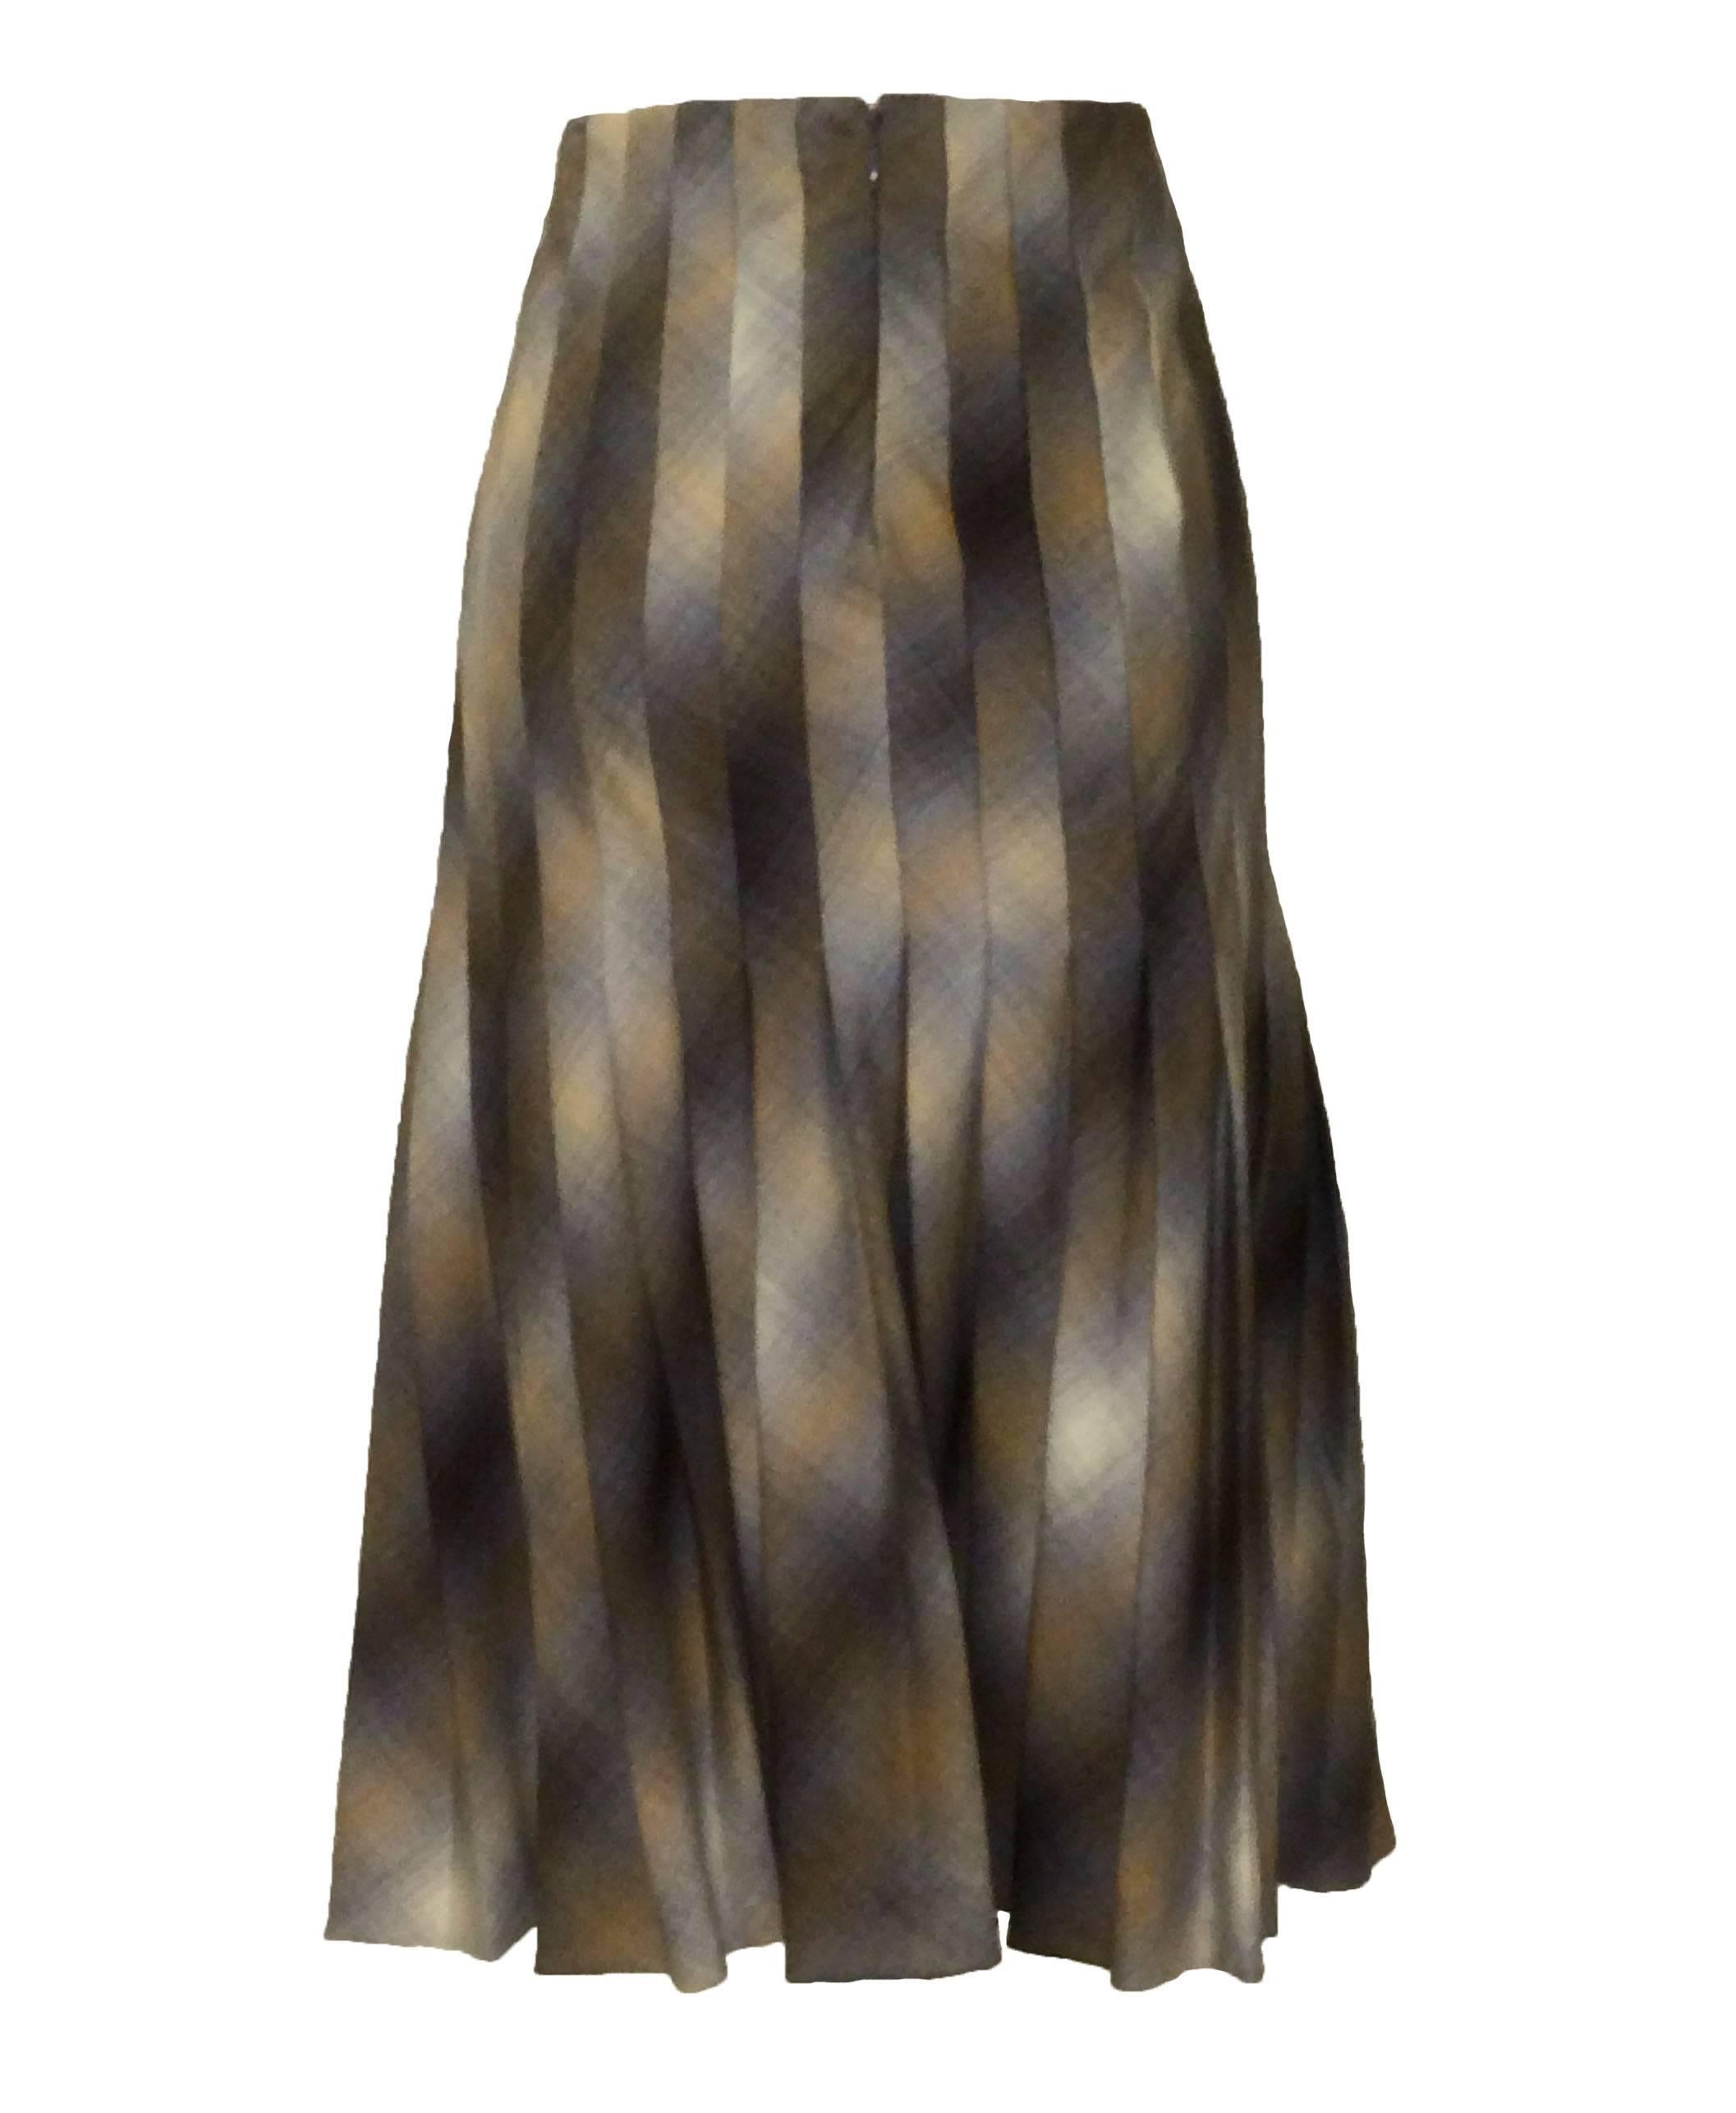 Alexander McQueen camel and grey plaid pleated wool skirt with textured leather buckle details and leather-covered safety pin embellishment from the Fall 2005 Hitchcock-inspired collection 'The Man Who Knew Too Much.